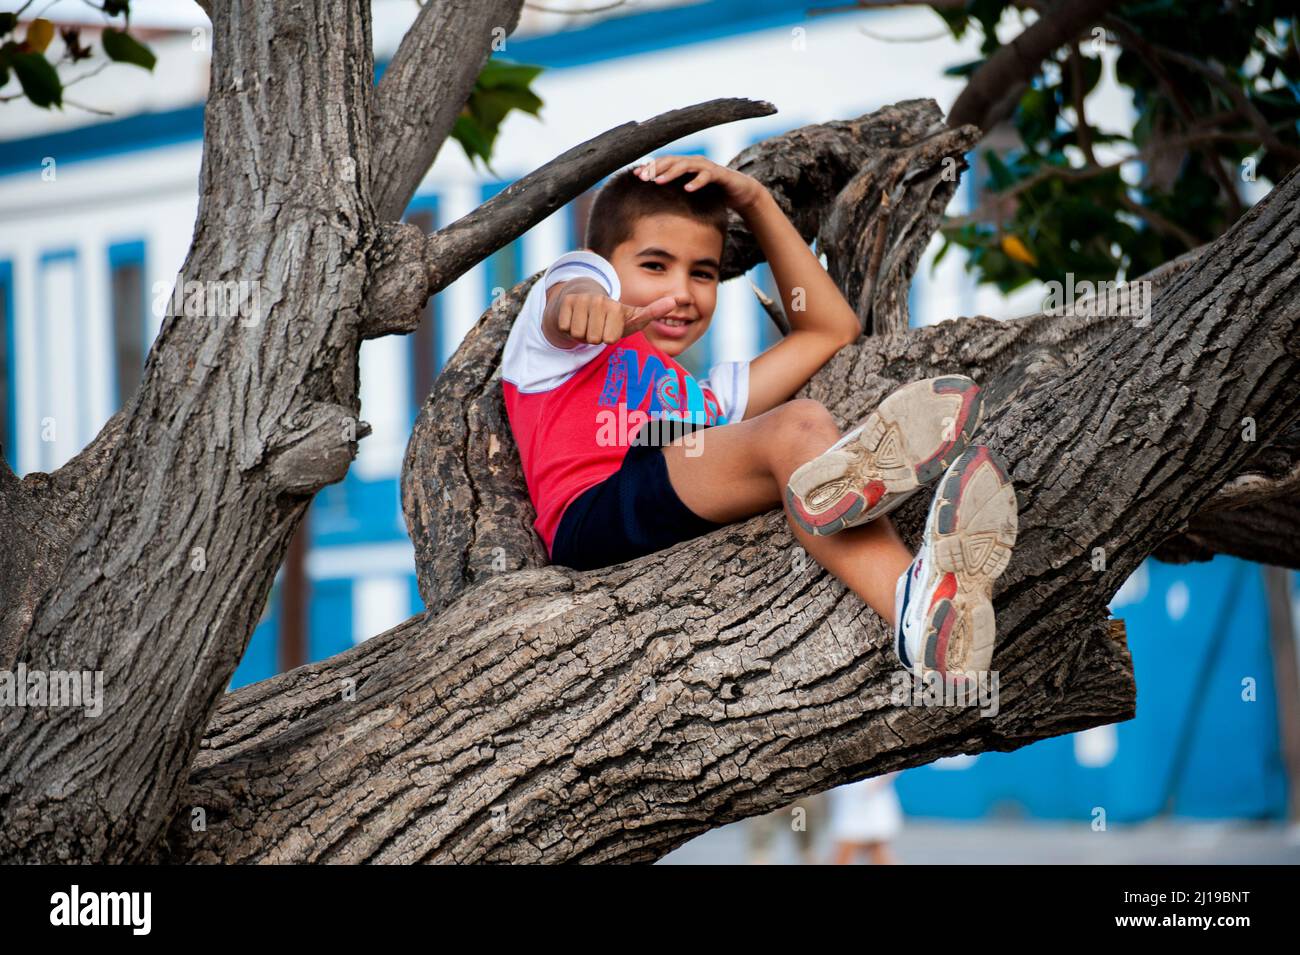 Cuban young boy gives the thumbs up sign while sitting on a tree in a park in Havana, Cuba. Stock Photo